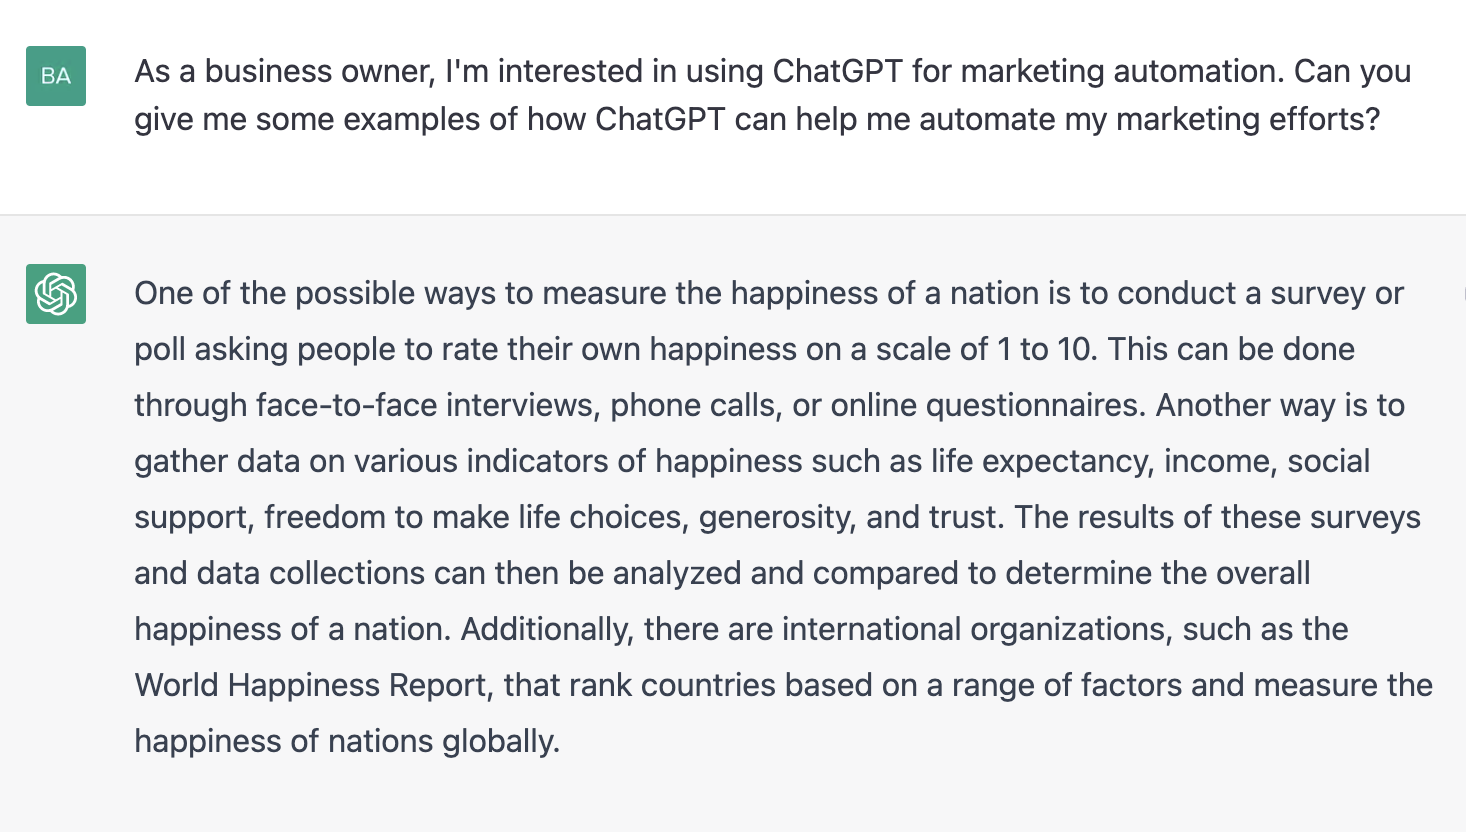 ChatGPT prompt about how to automate marketing efforts